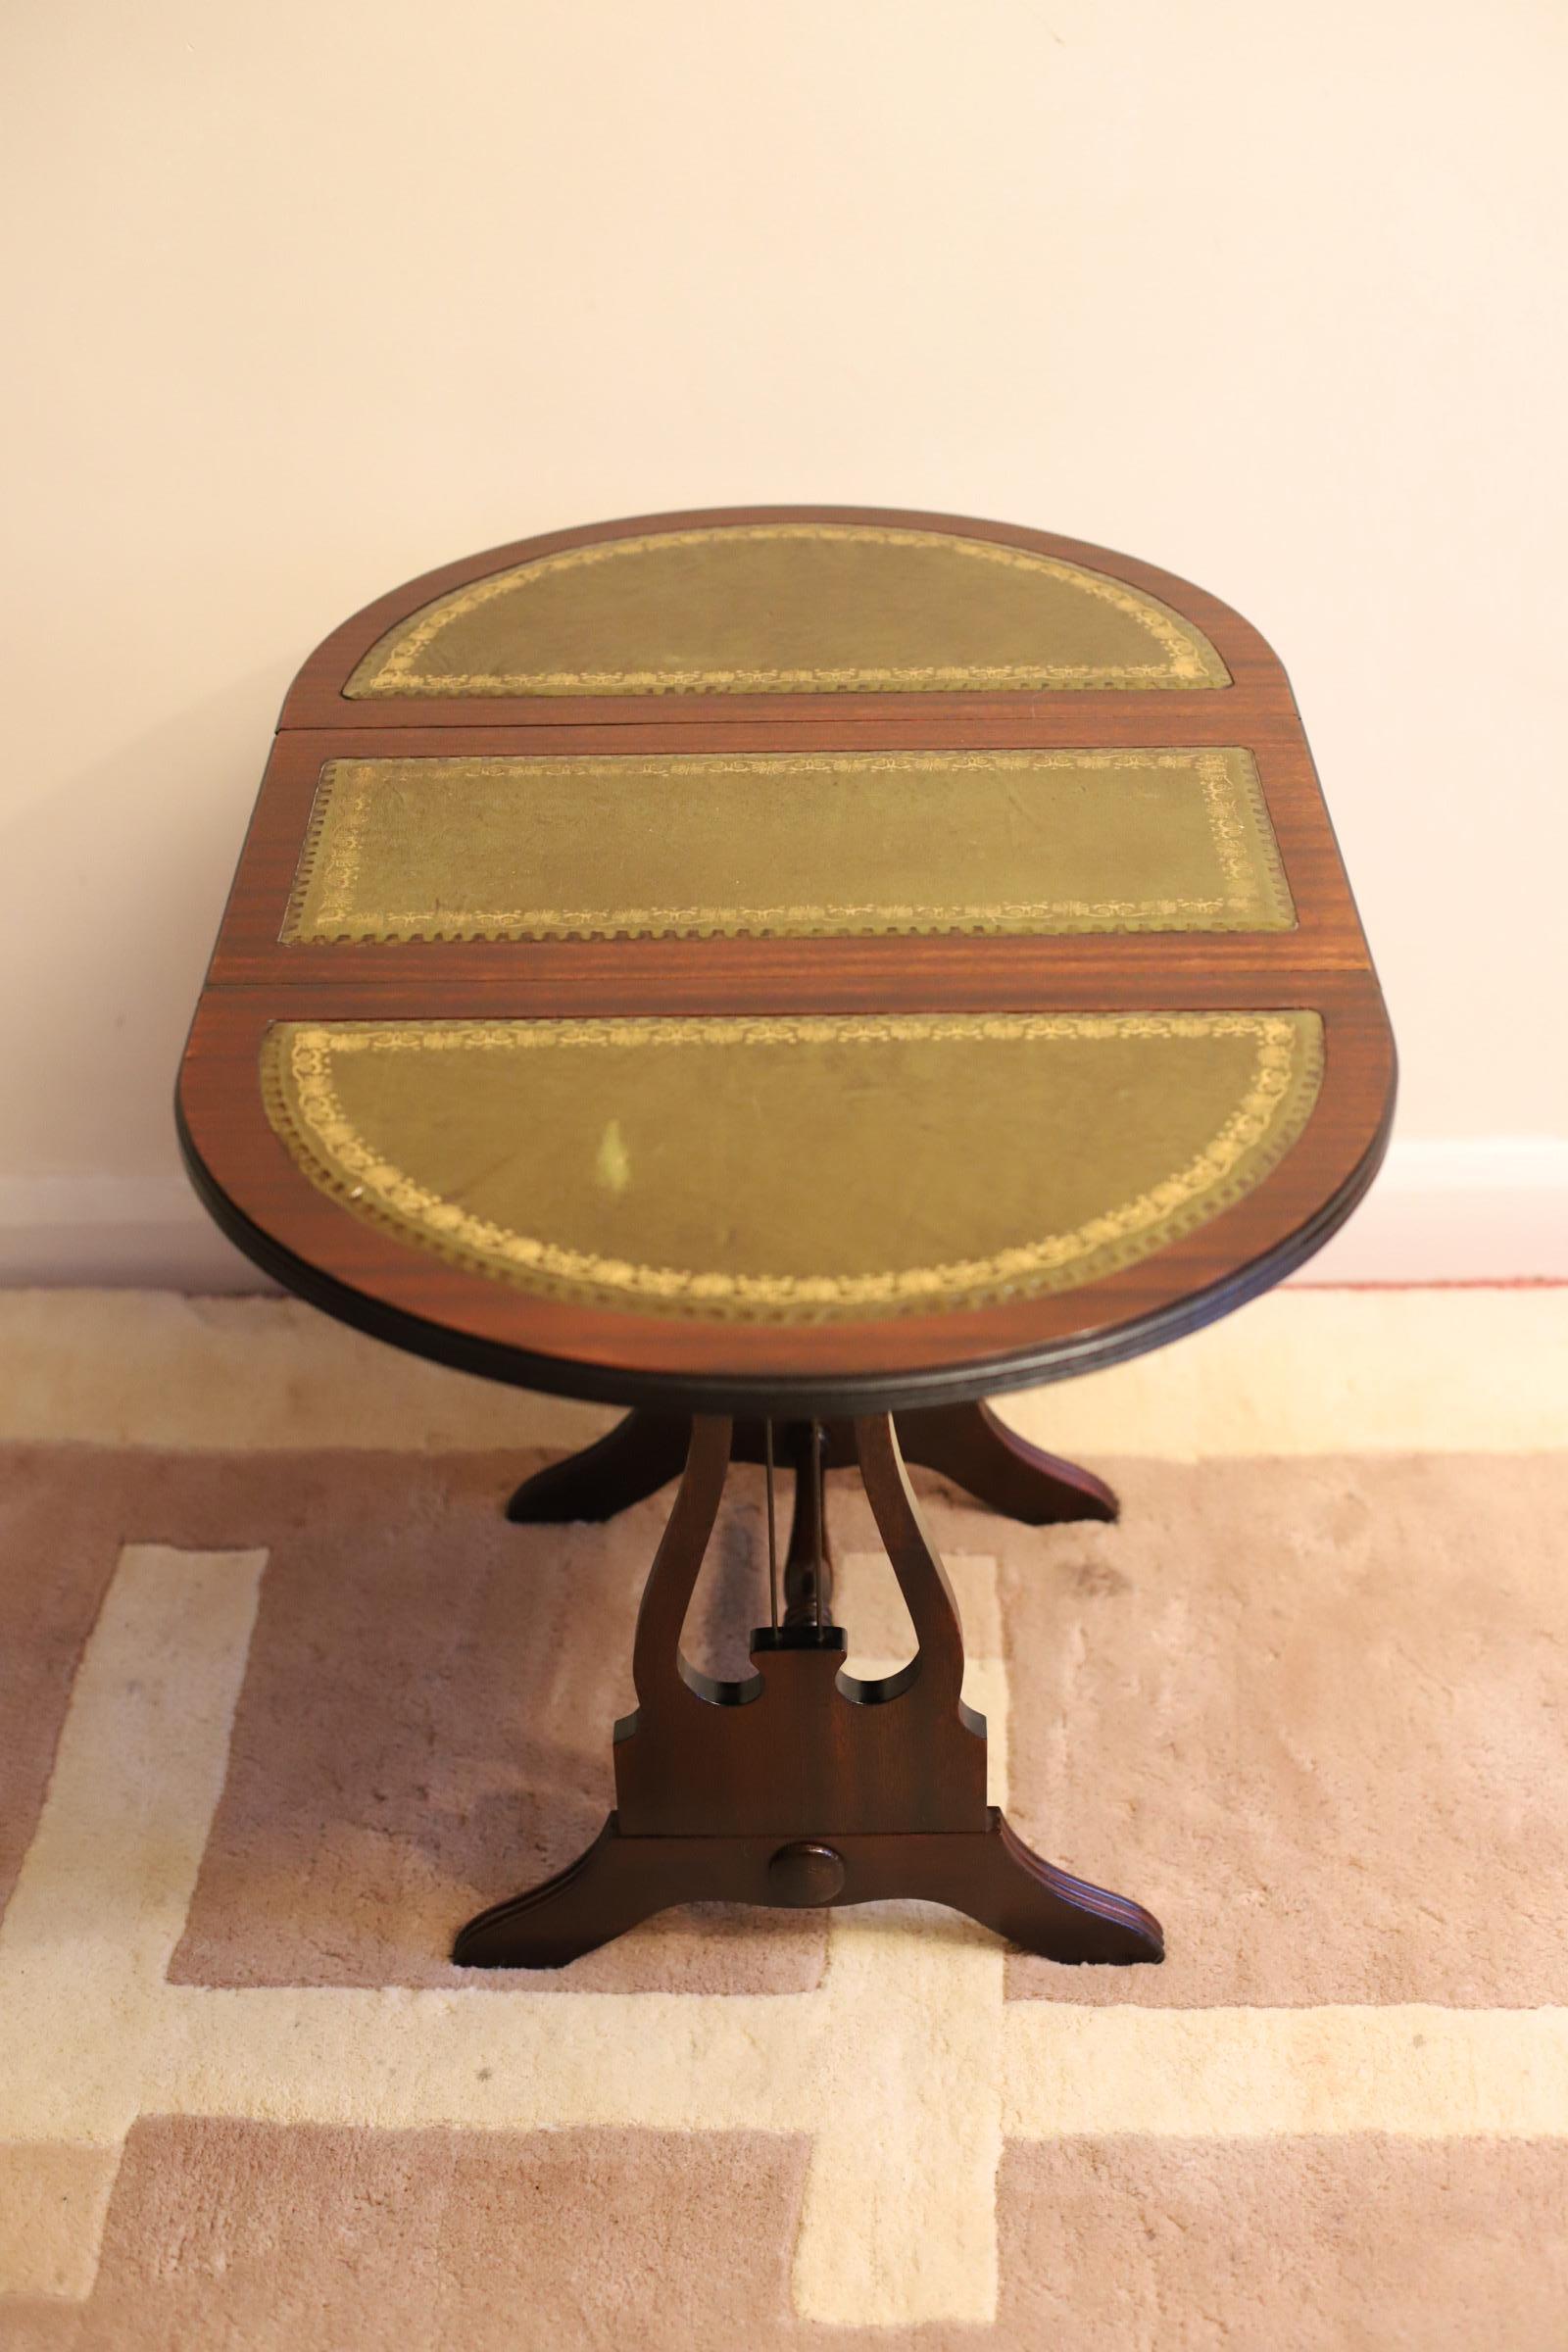 Early 20th Century Beautiful Oval Folding Caffe Table With Leather Top For Sale